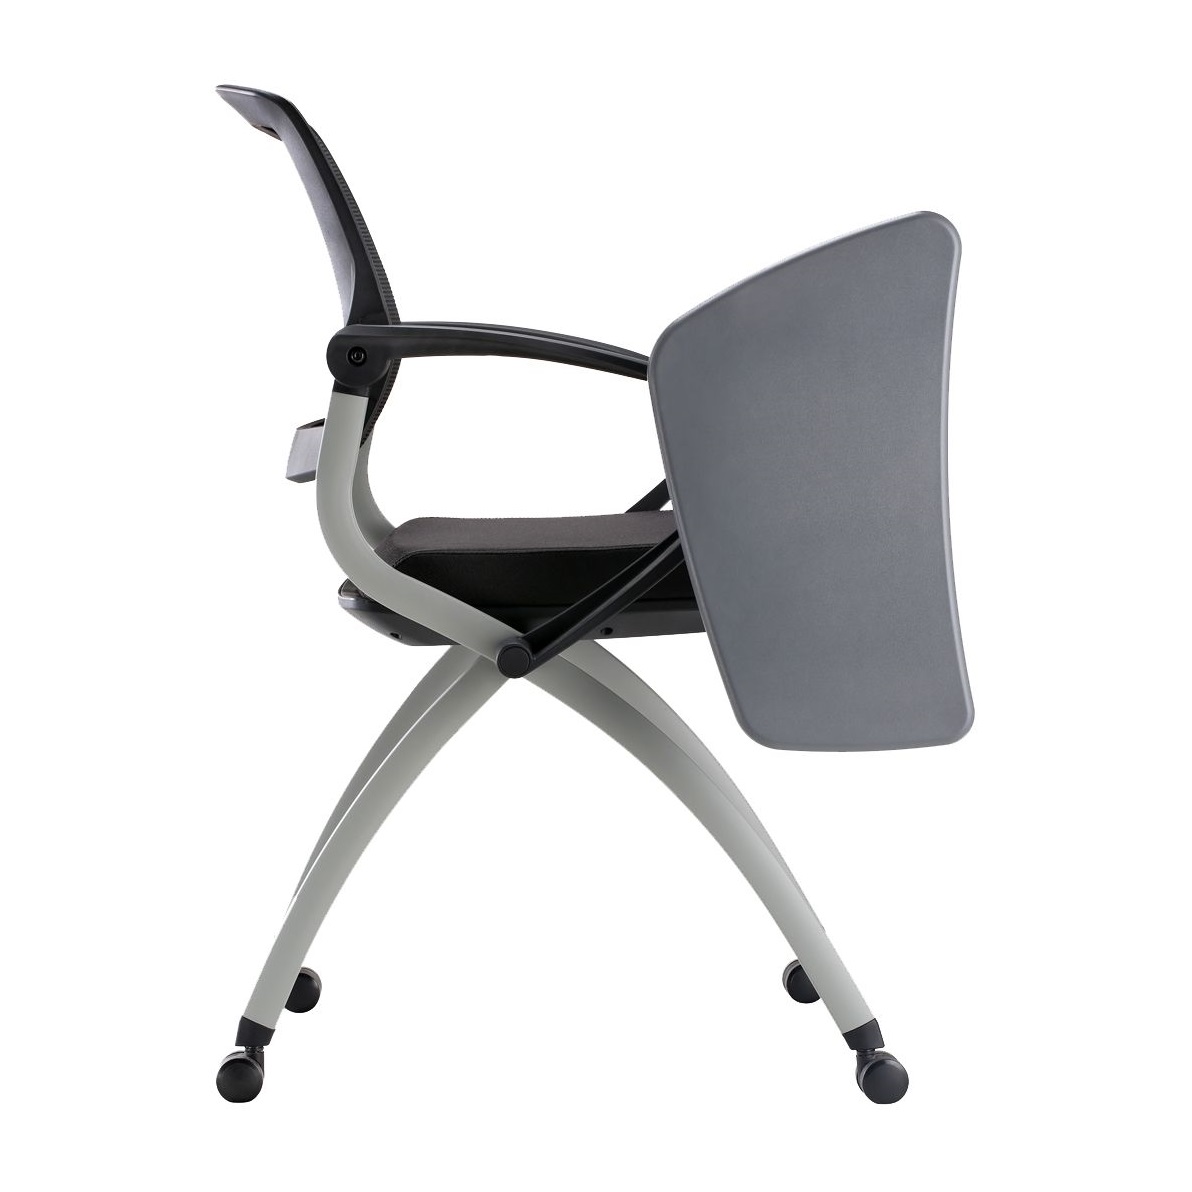 Zoom Chair tablet sideview